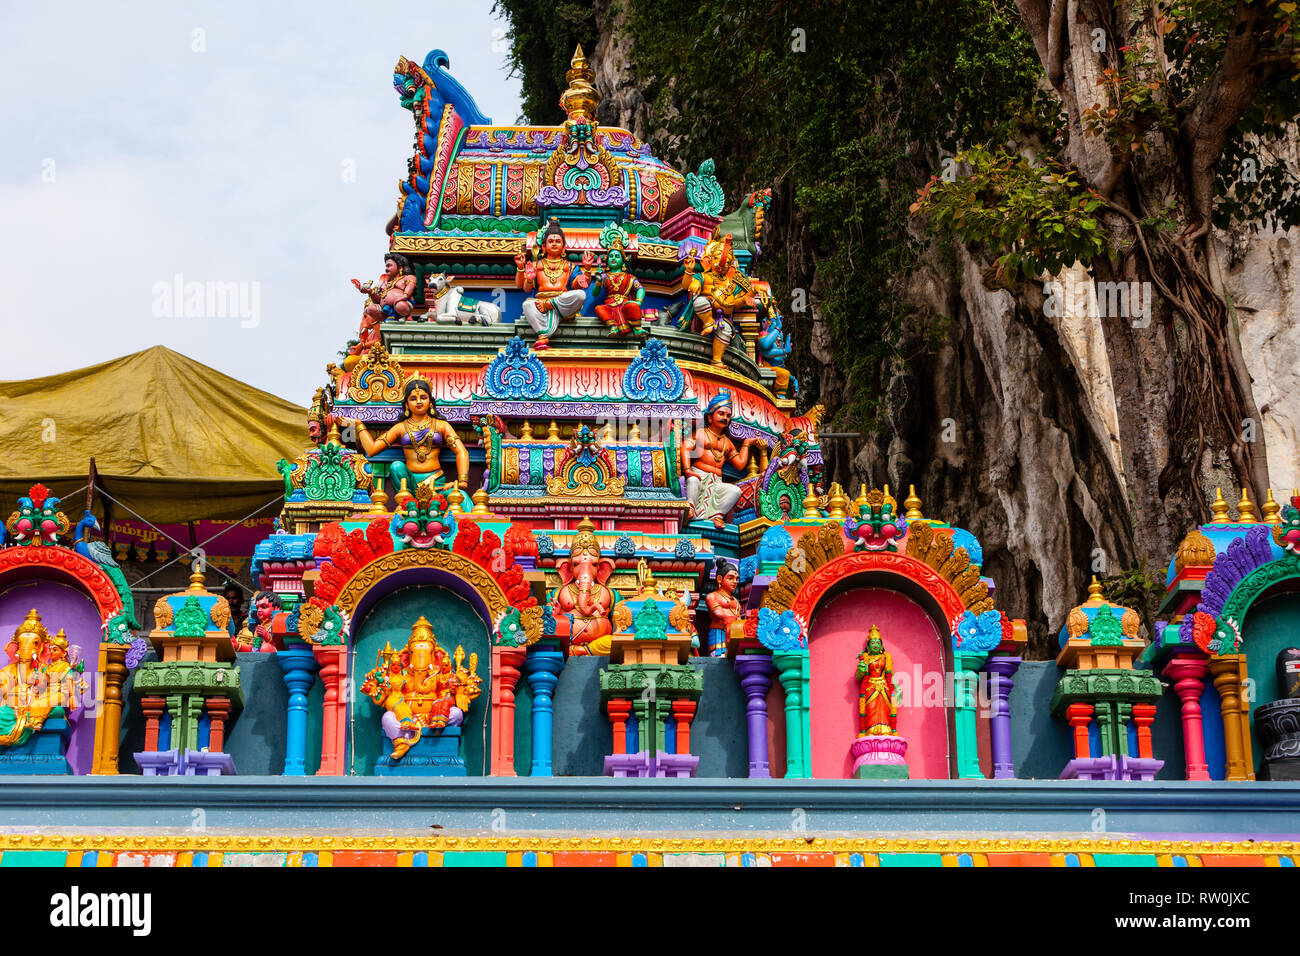 Batu Caves, Hindu Deities on Temple at Base of Stairs leading to Caves, Selangor, Malaysia. Stock Photo